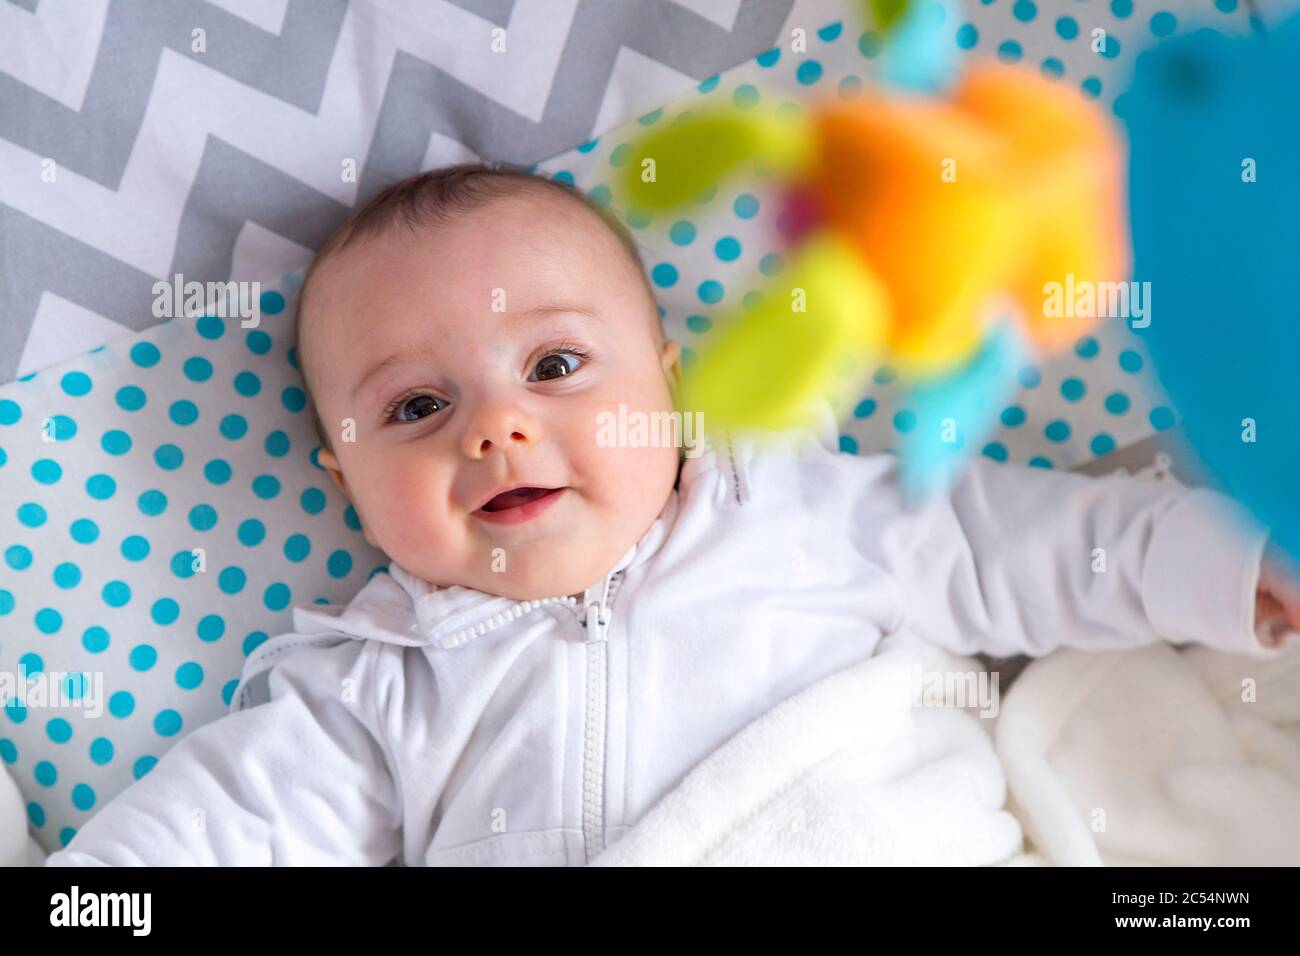 Funny baby boy looking up a mobile in his cradle. Stock Photo